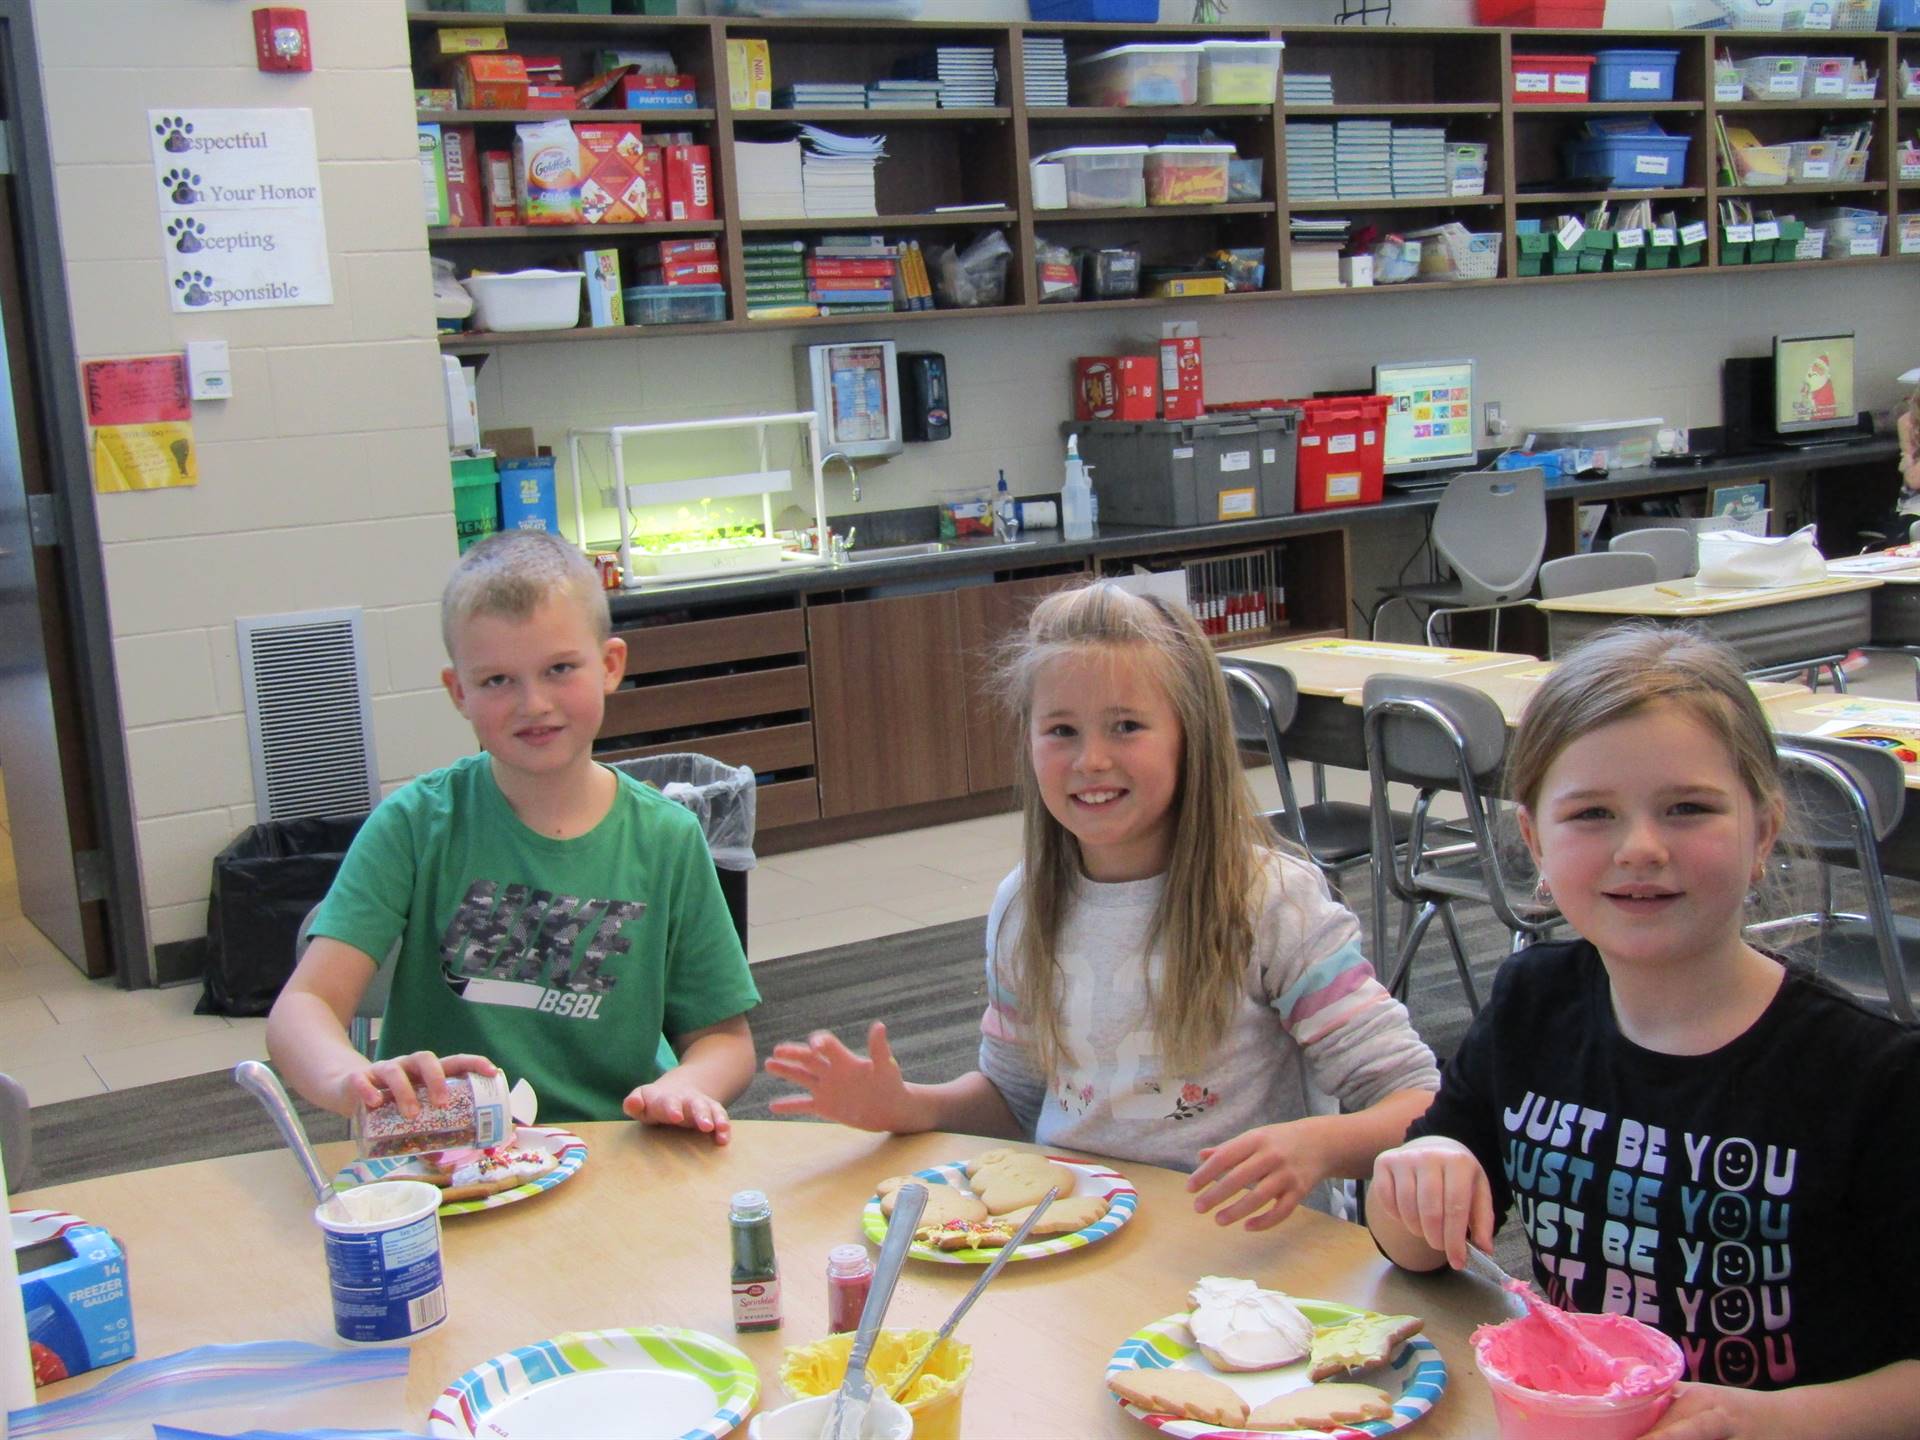 3 students decorating Christmas cookies